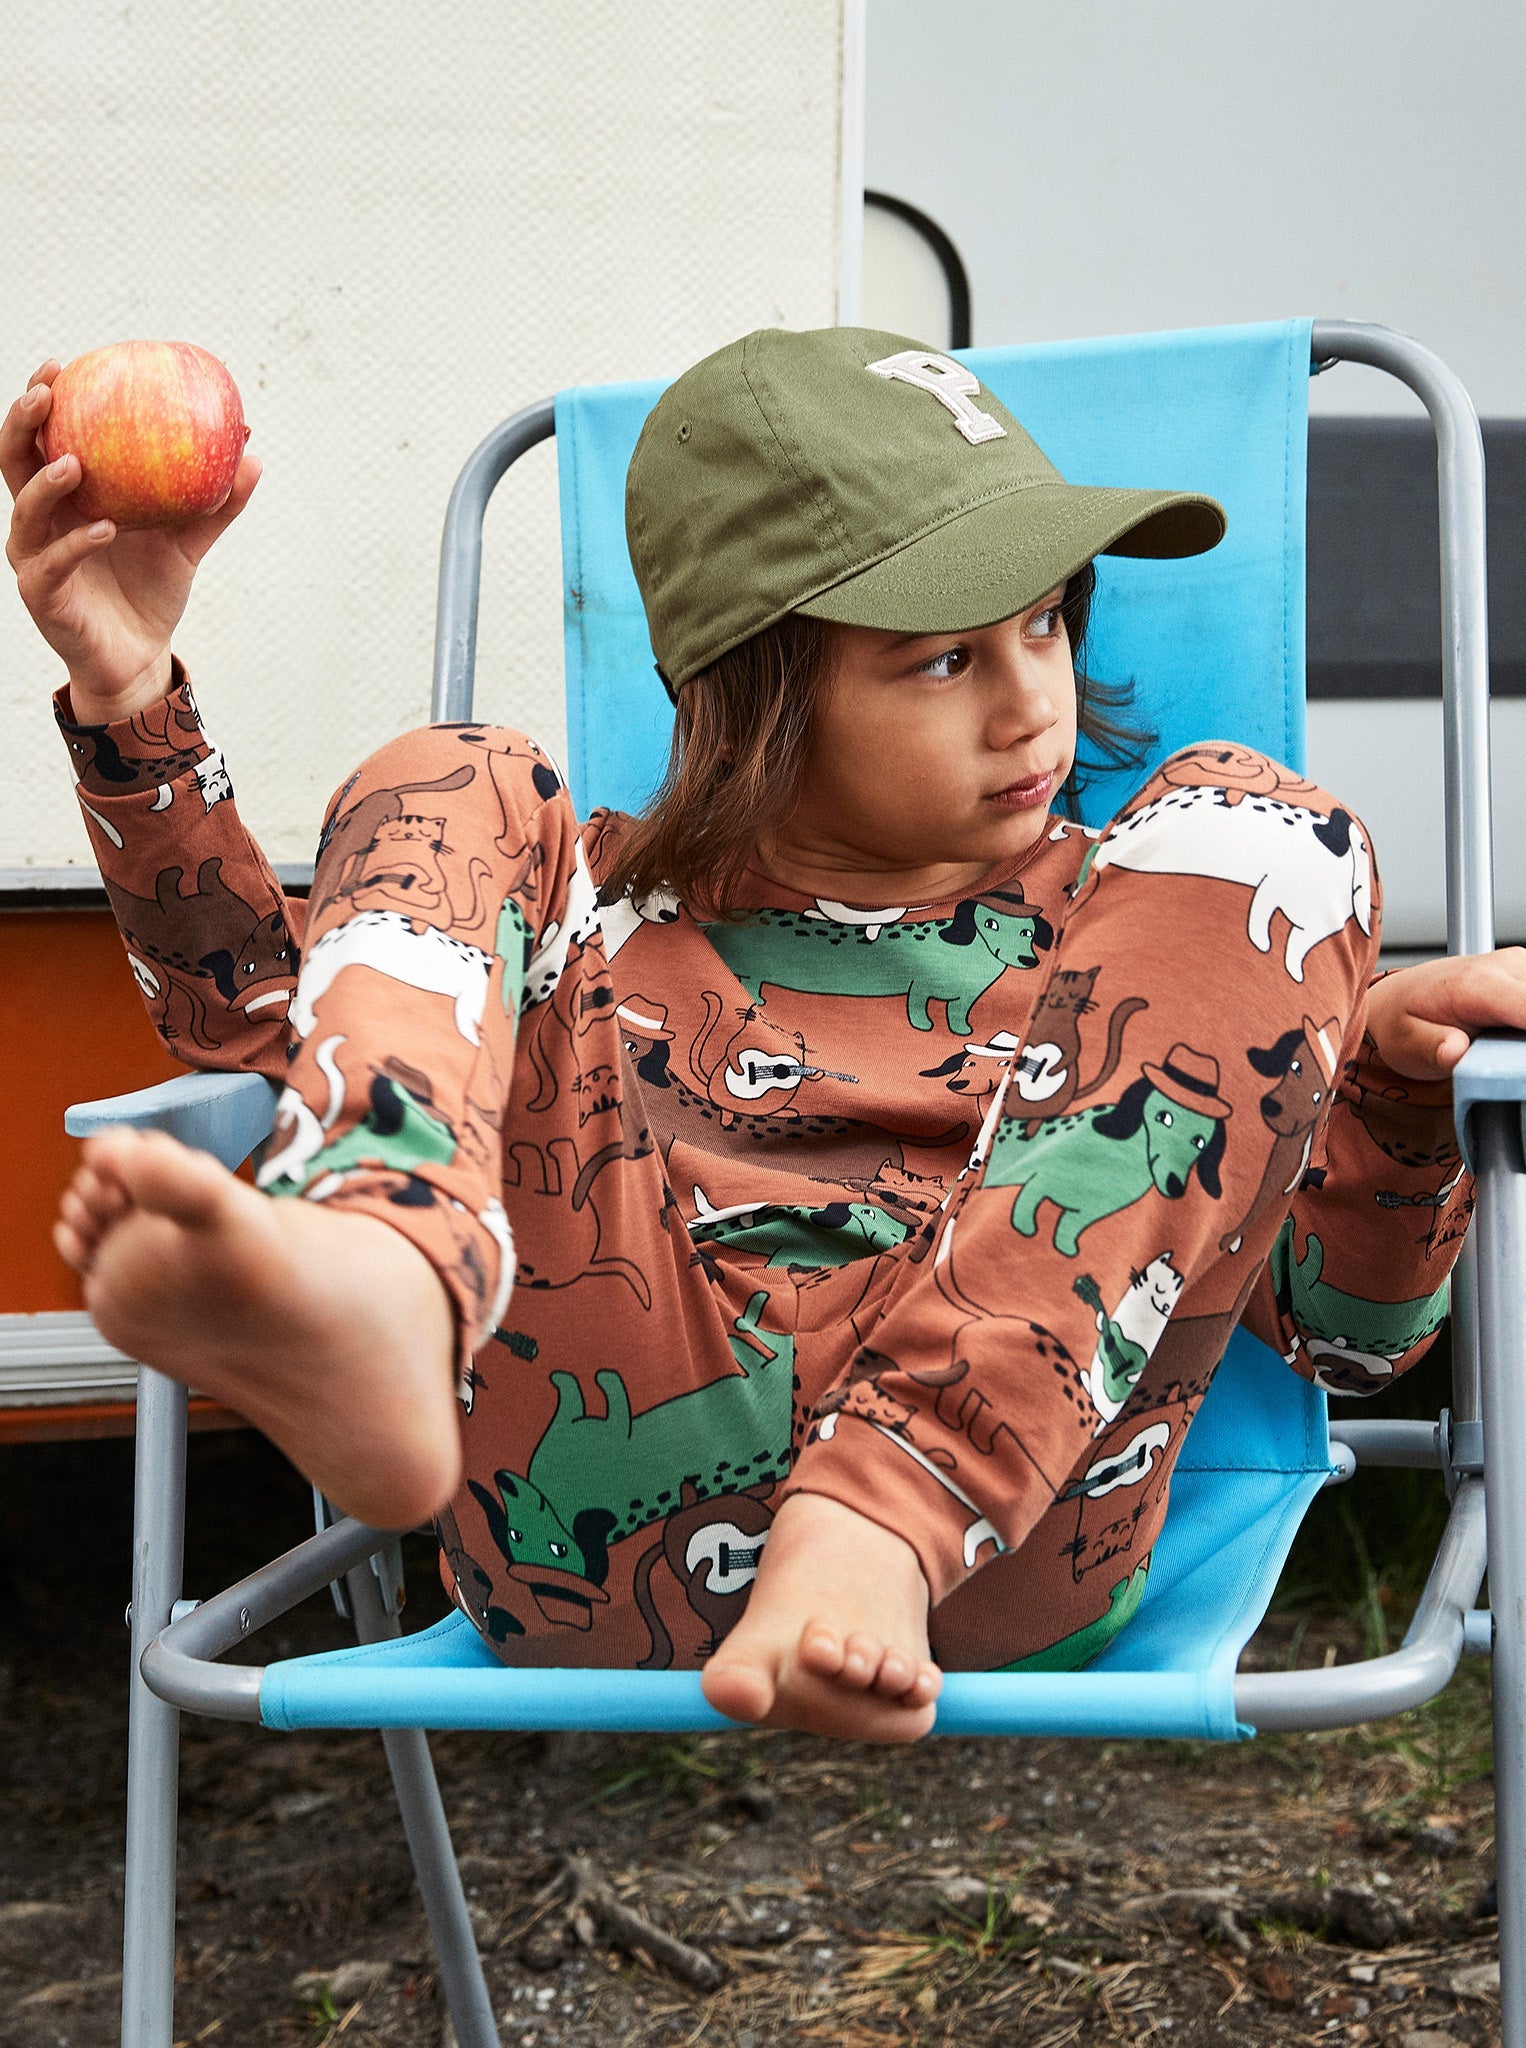 Sausage Dog Print Kids Top from the Polarn O. Pyret Kidswear collection. Nordic kids clothes made from sustainable sources.